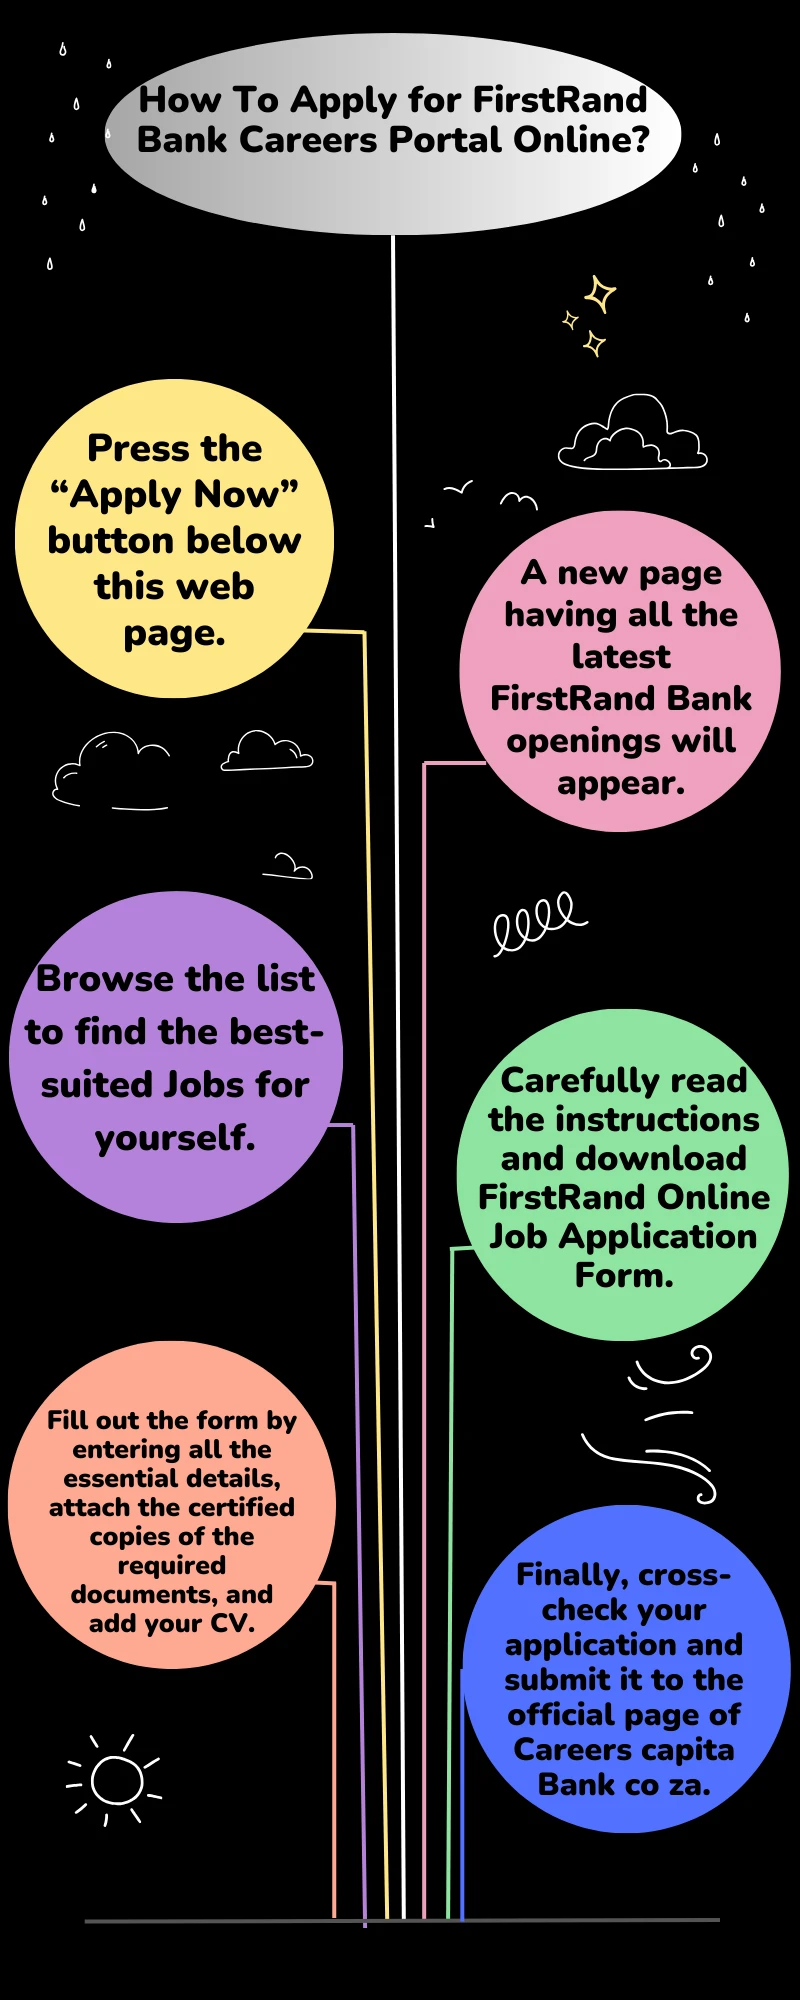 How To Apply for FirstRand Bank Careers Portal Online?